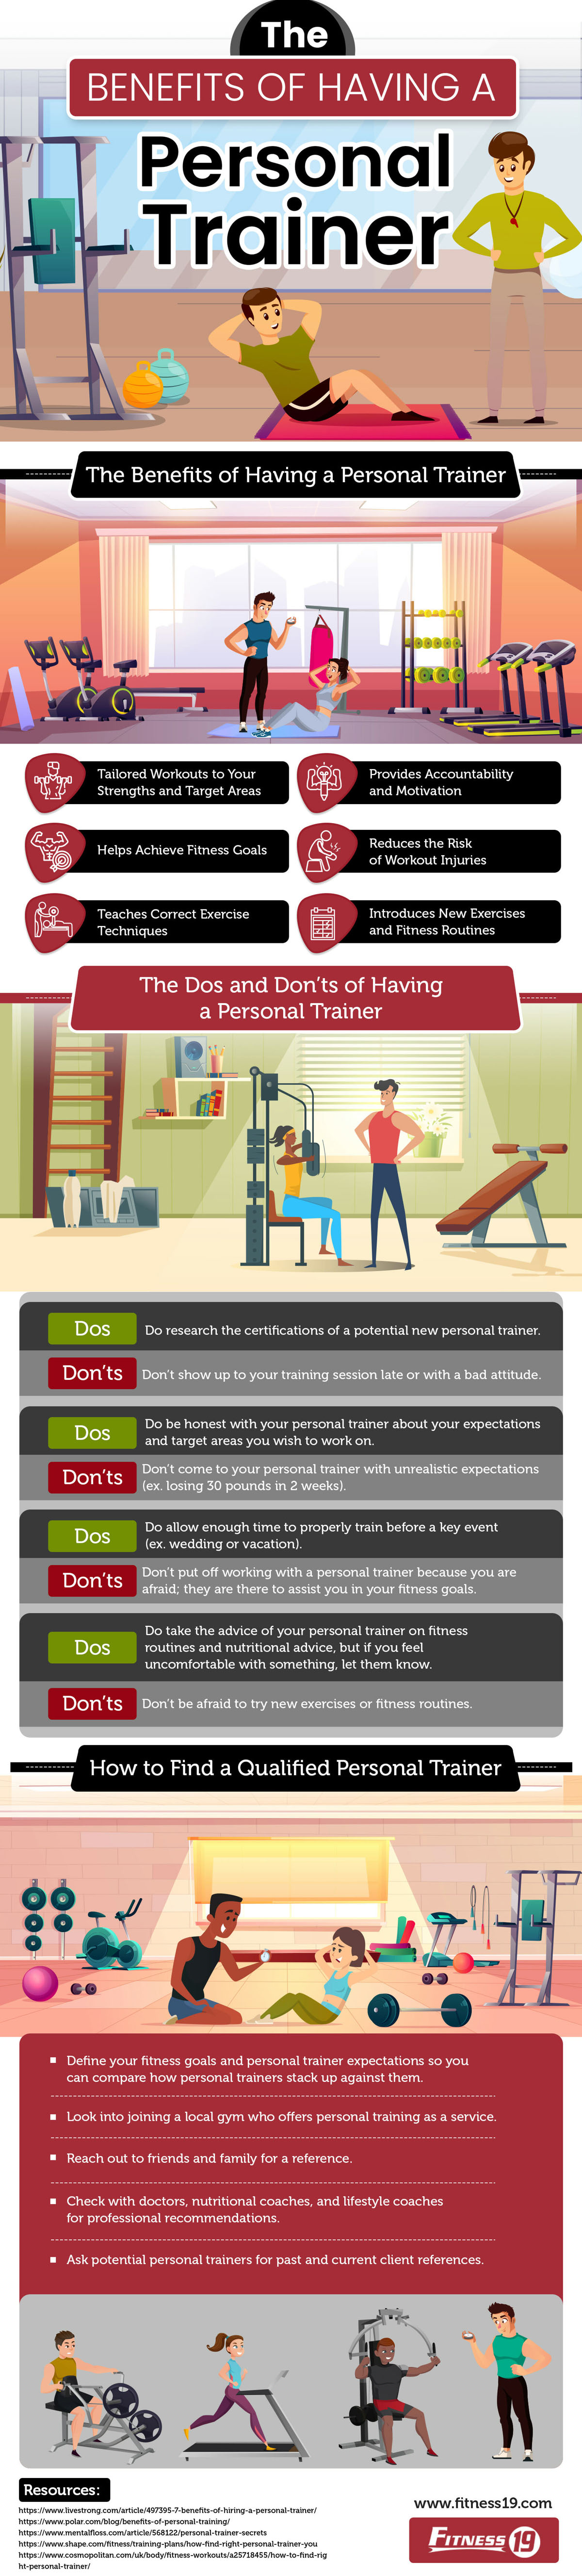 The Benefits of Having a Personal Trainer